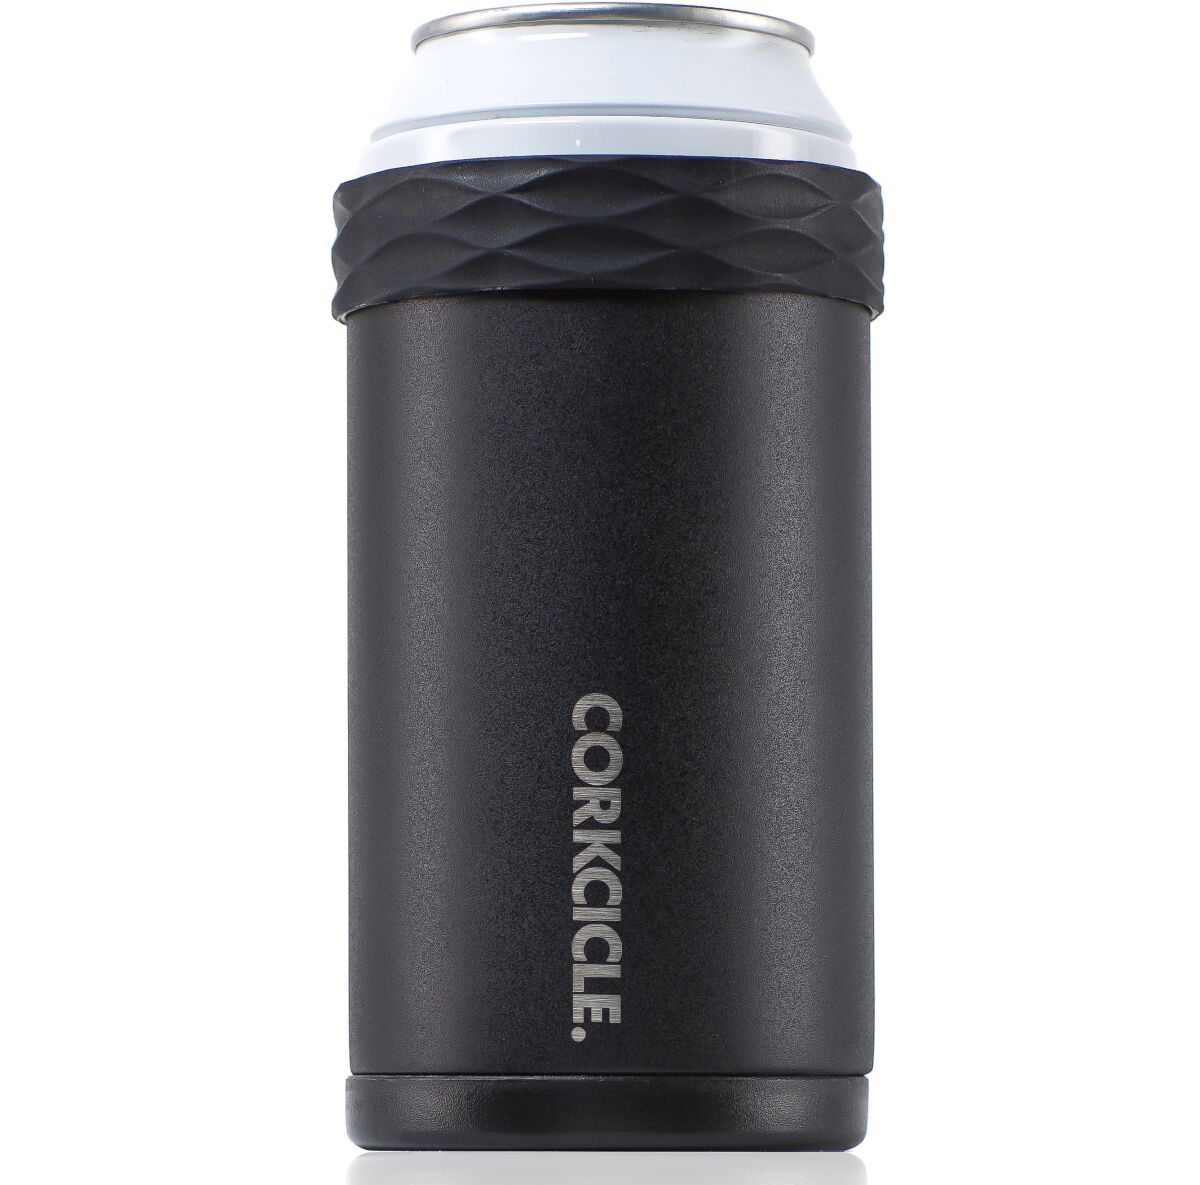 Classic Arctican can cooler from Corkcicle (Courtesy photo)